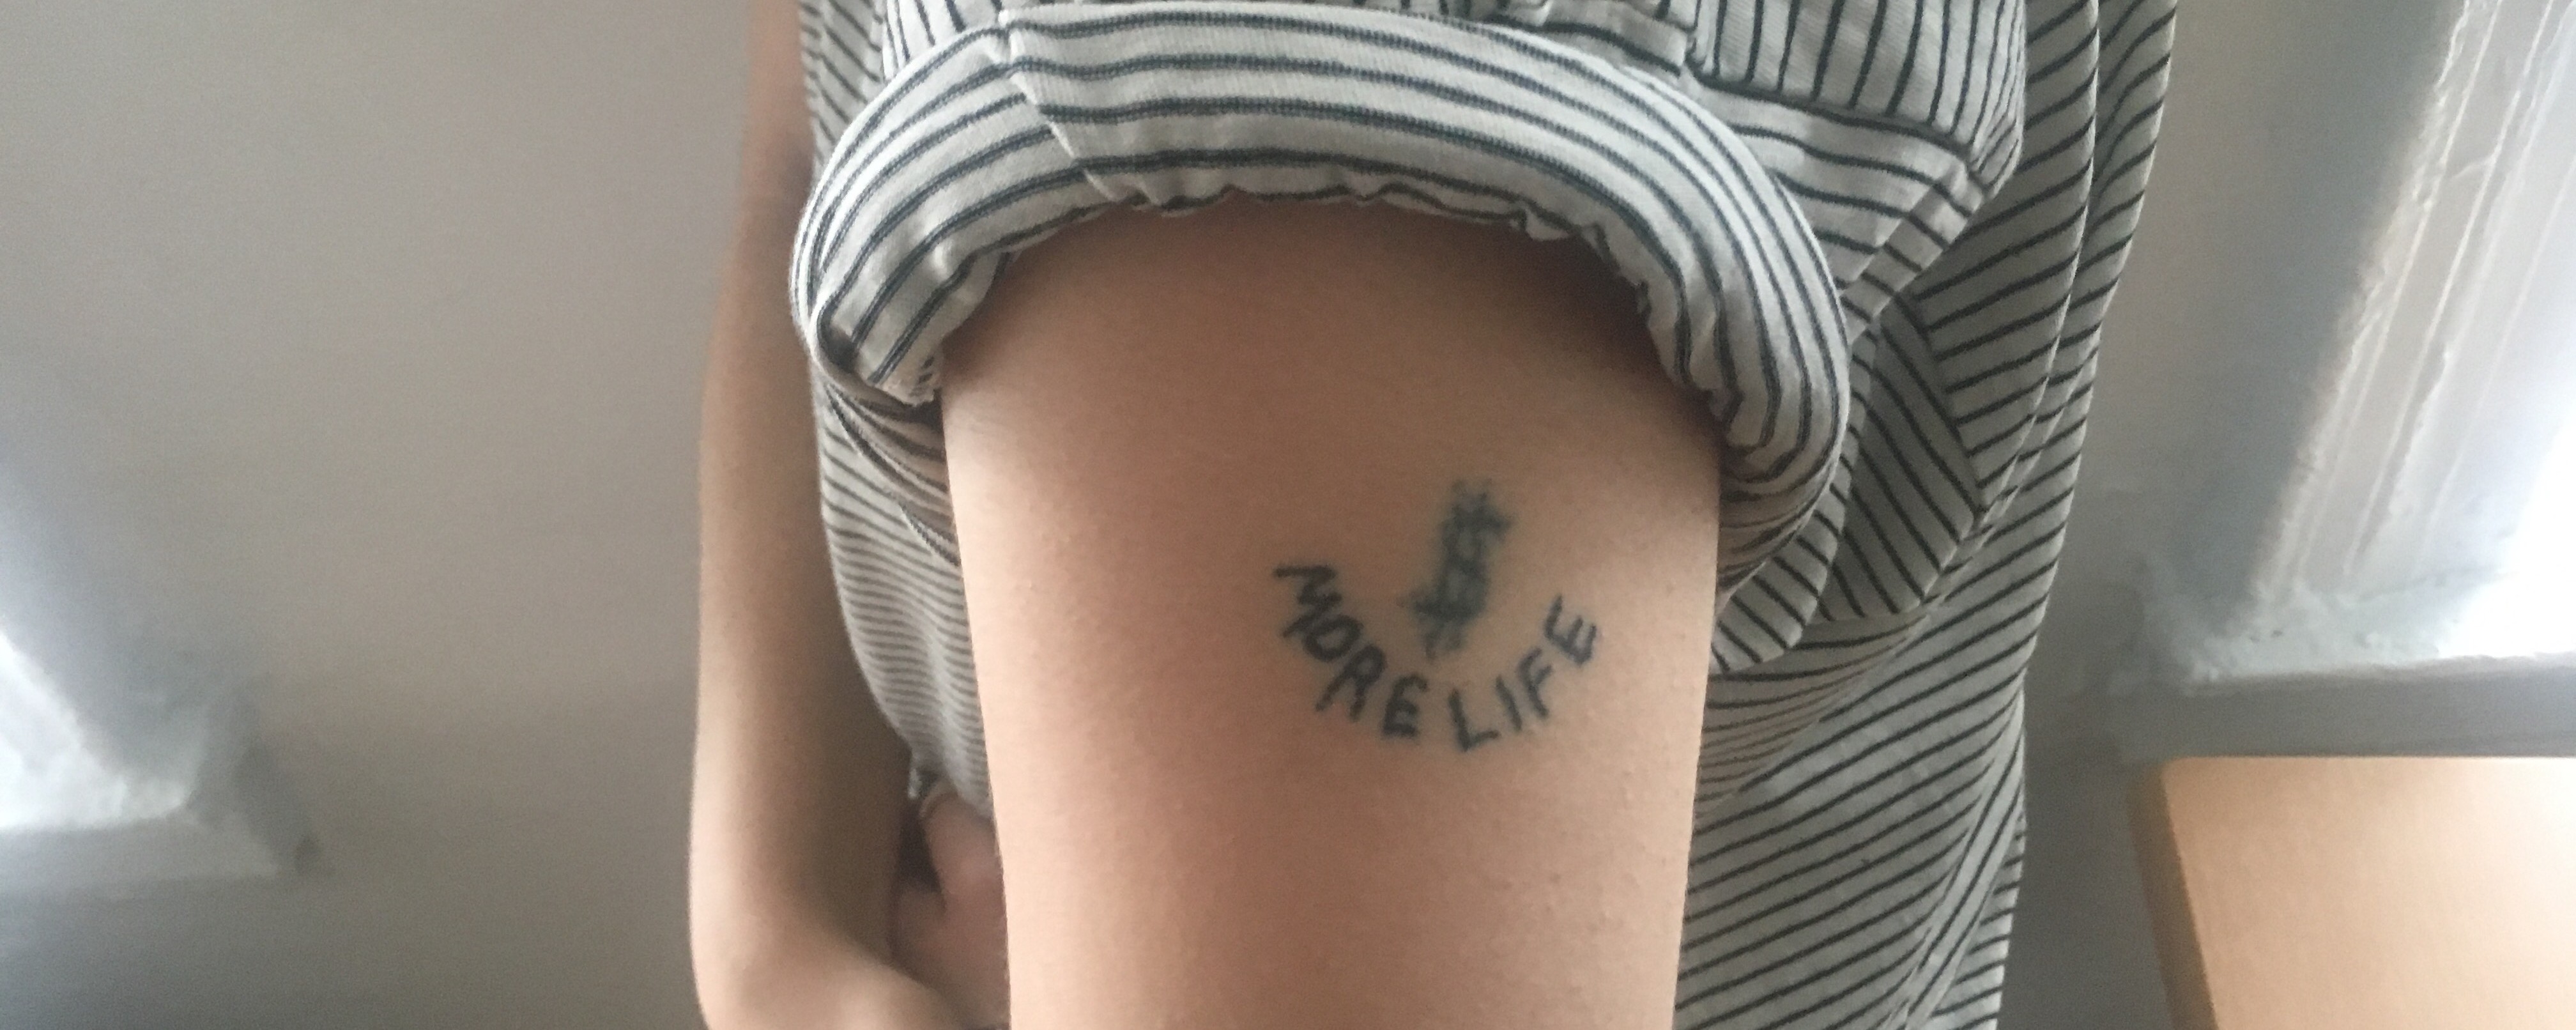 How Risky are Stick and Poke Tattoos?